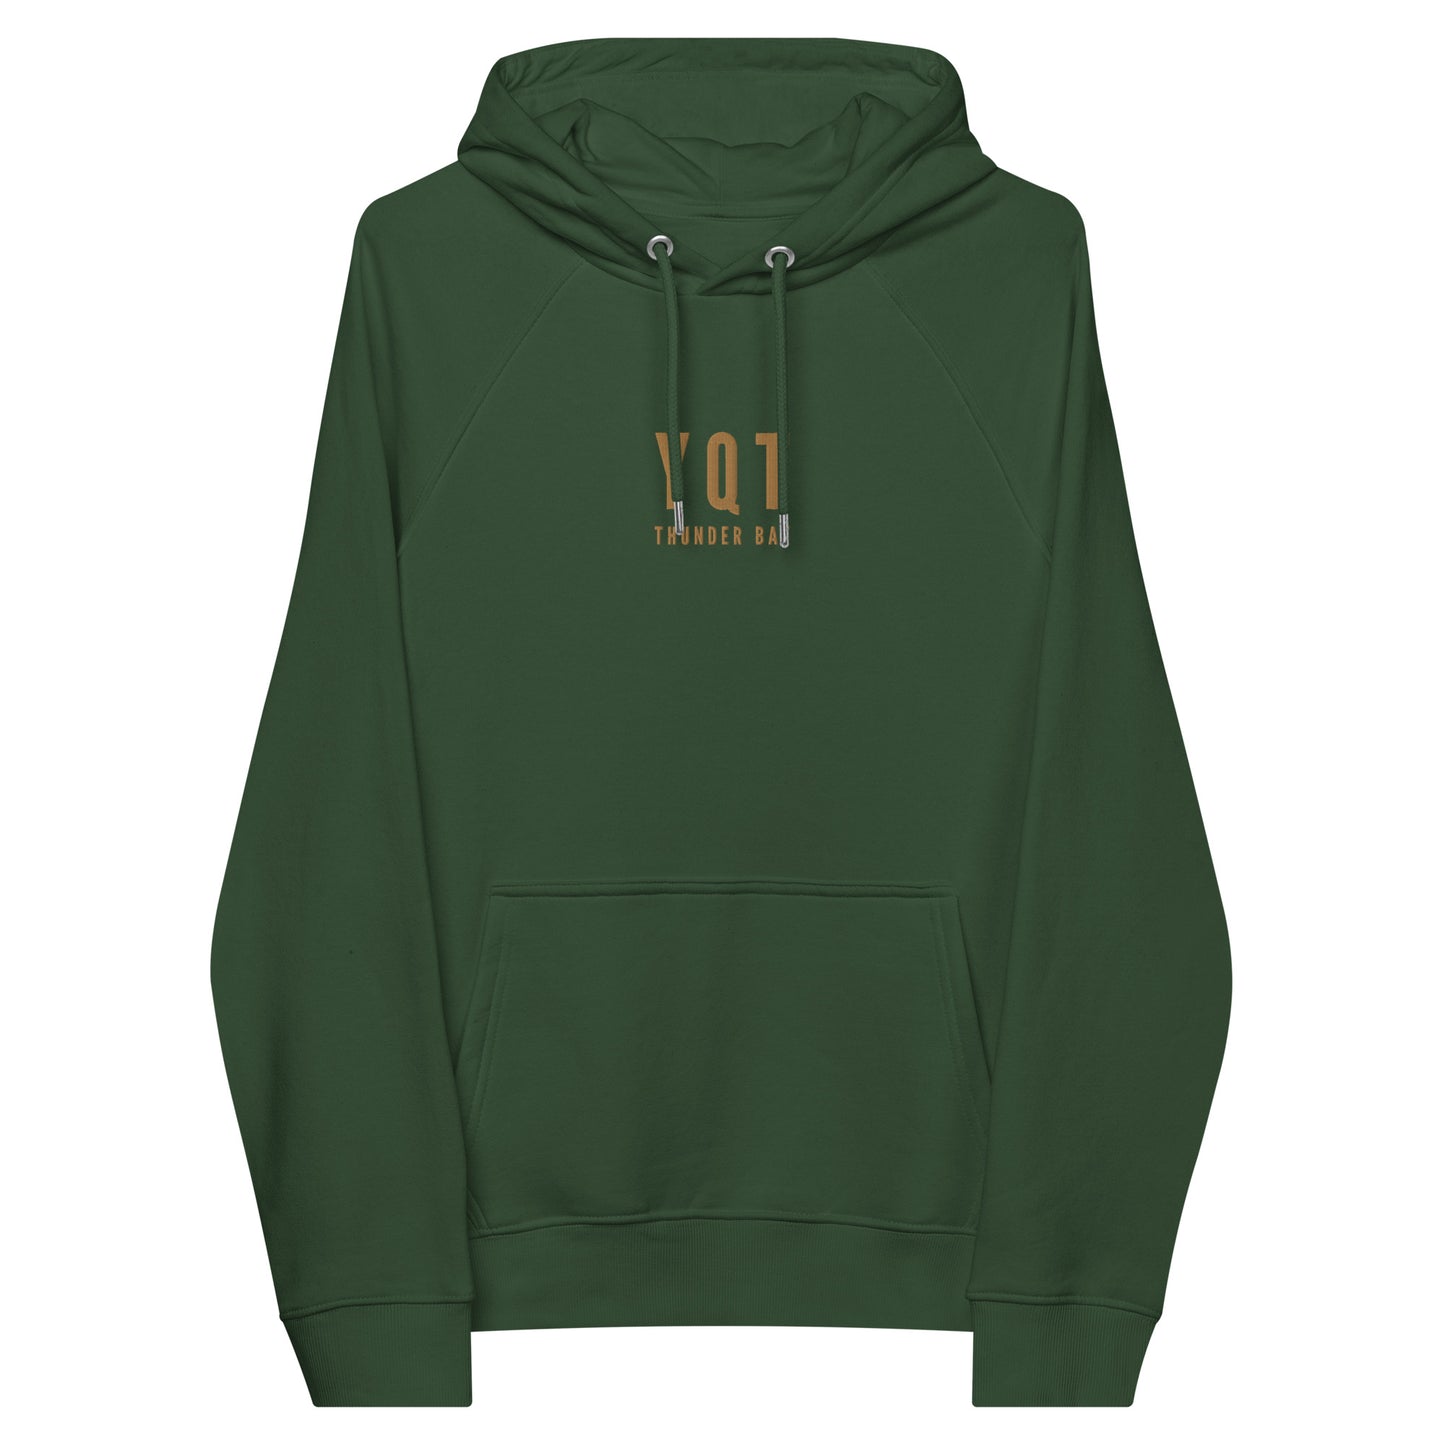 City Organic Hoodie - Old Gold • YQT Thunder Bay • YHM Designs - Image 08